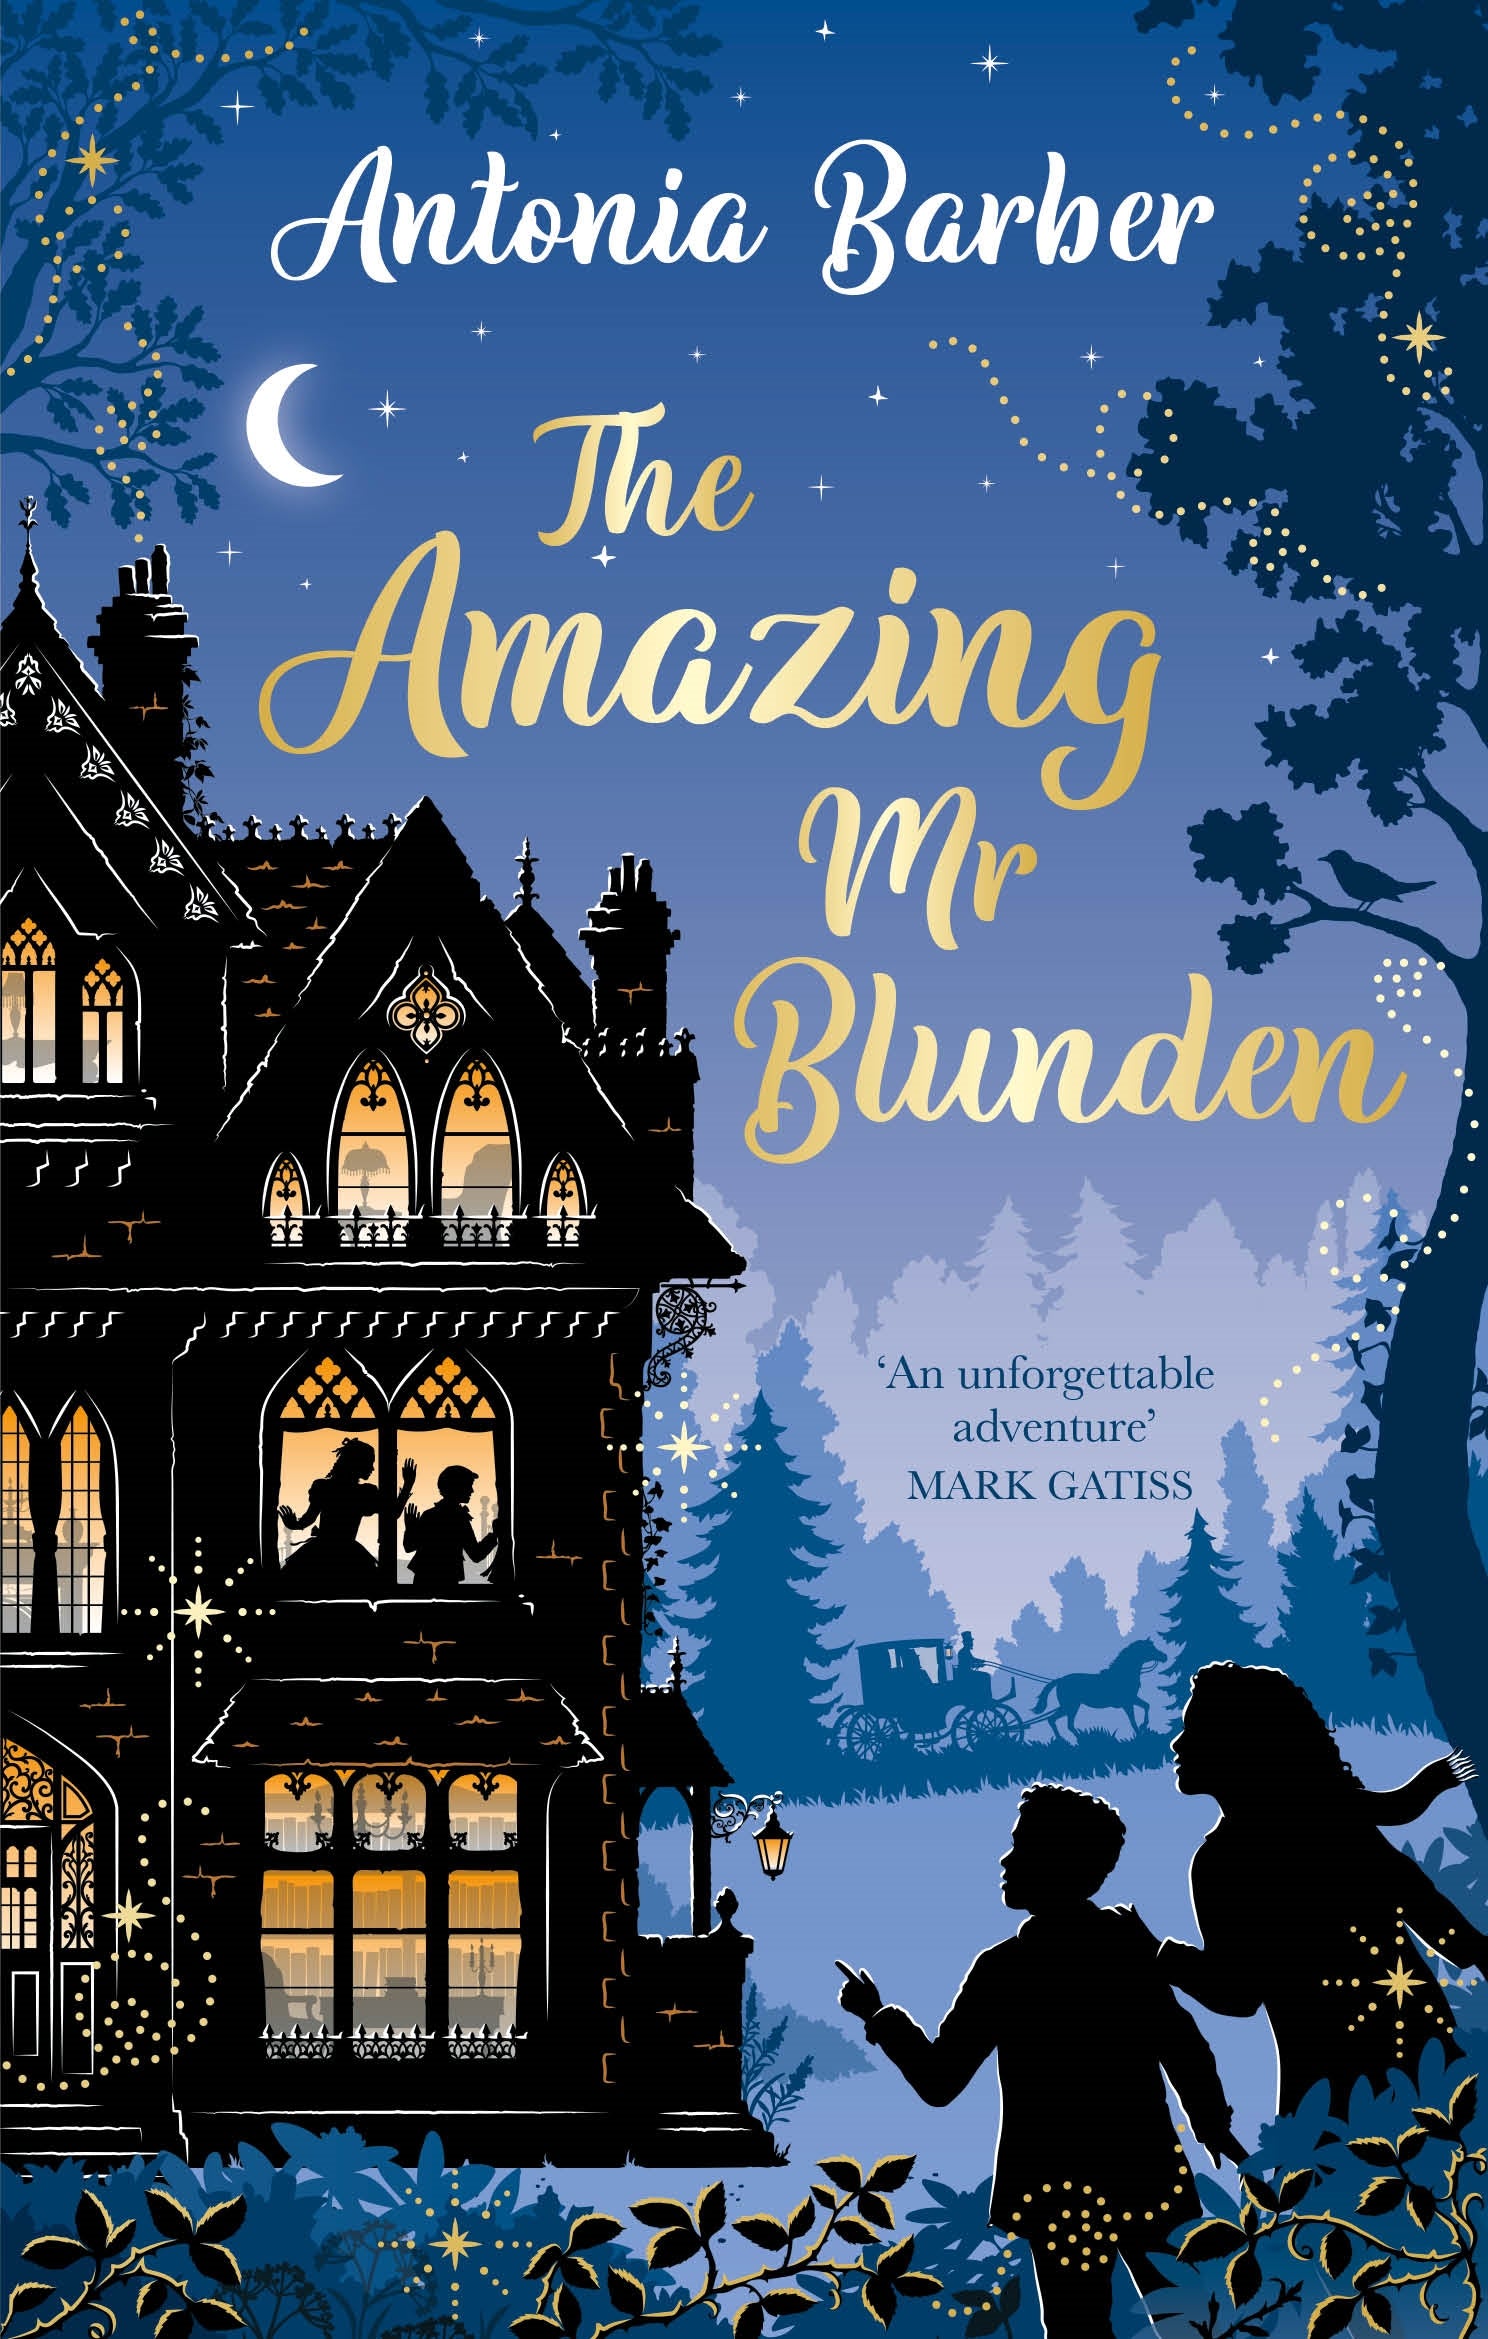 The Amazing Mr Blunden by Antonia Barber